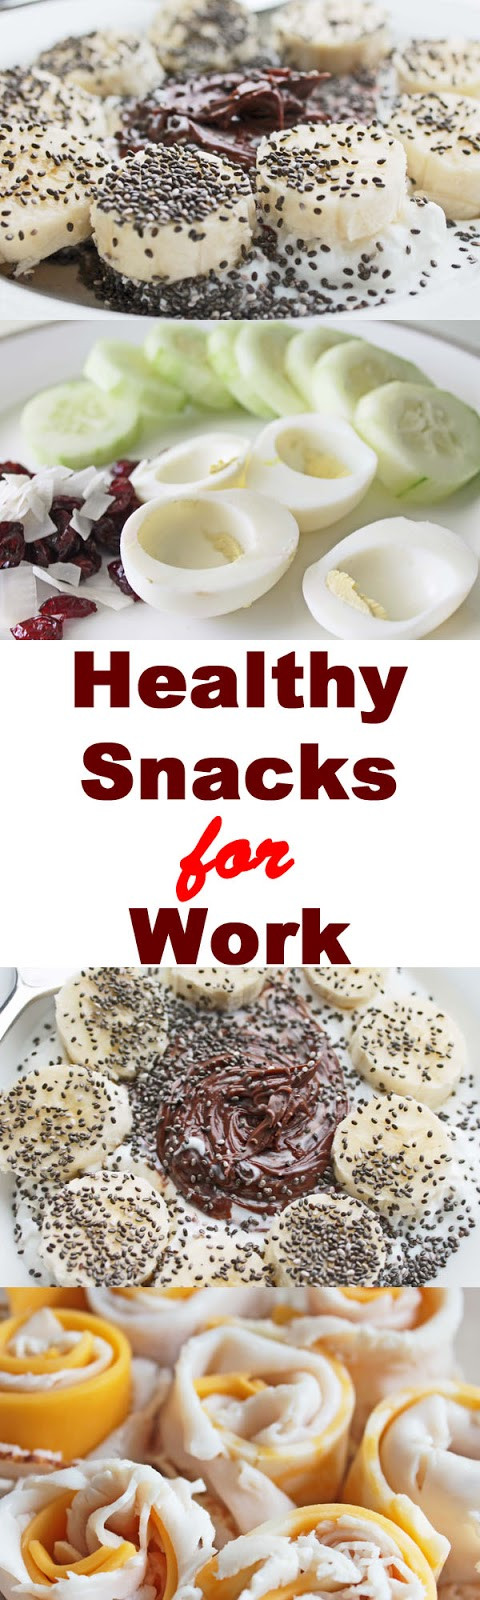 Best Healthy Snacks For Work
 Healthy Snacks for Work Daily Re mendations 13